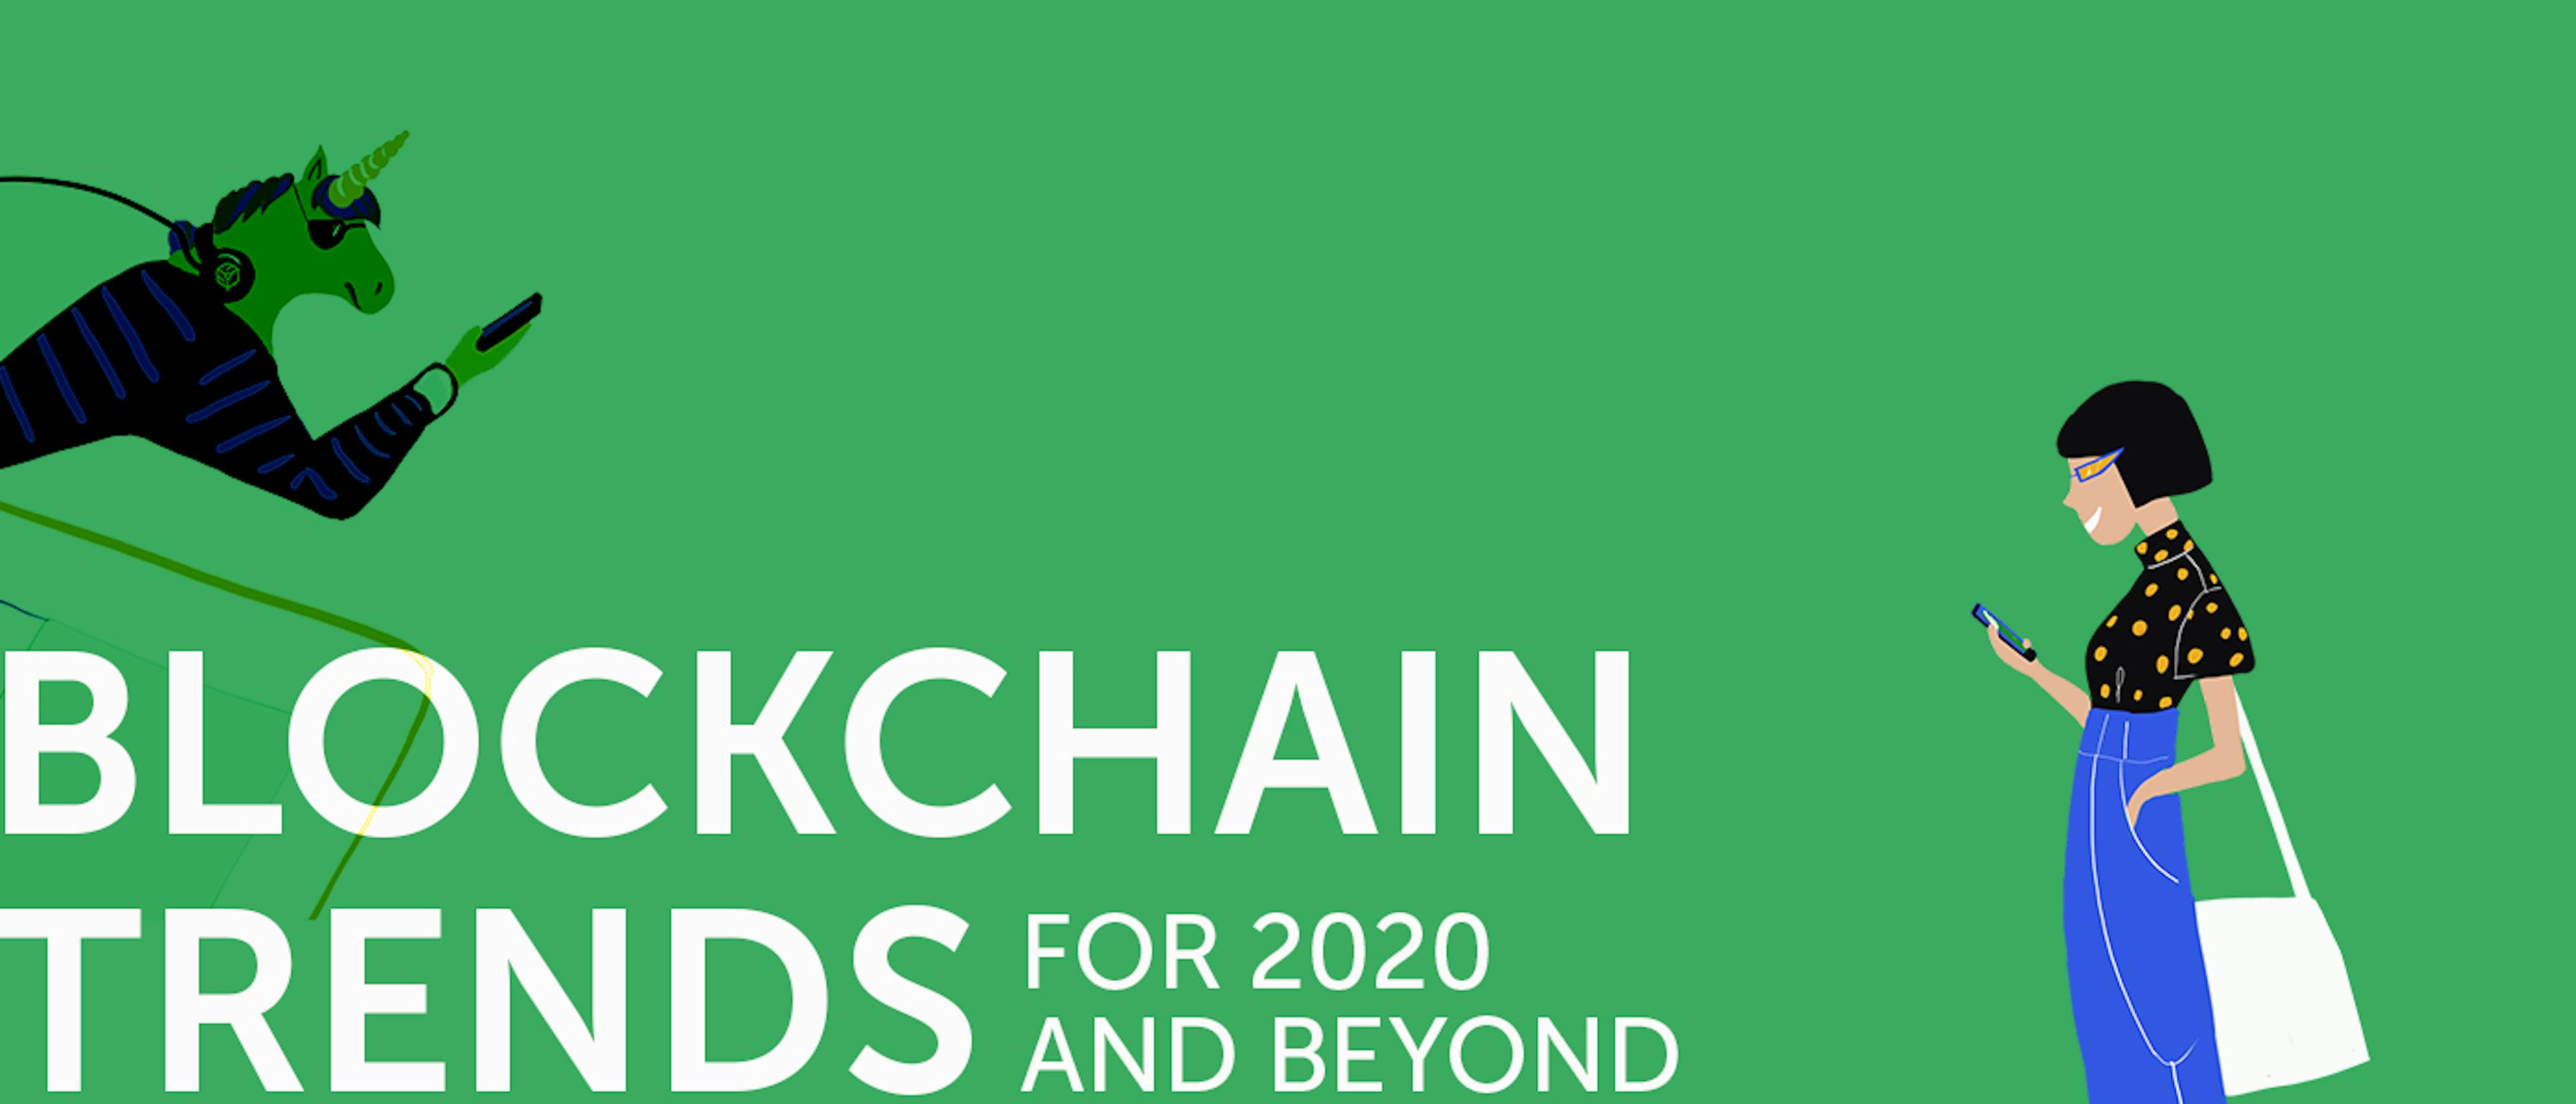 featured image - Top 7 Blockchain Trends for 2020 and Beyond